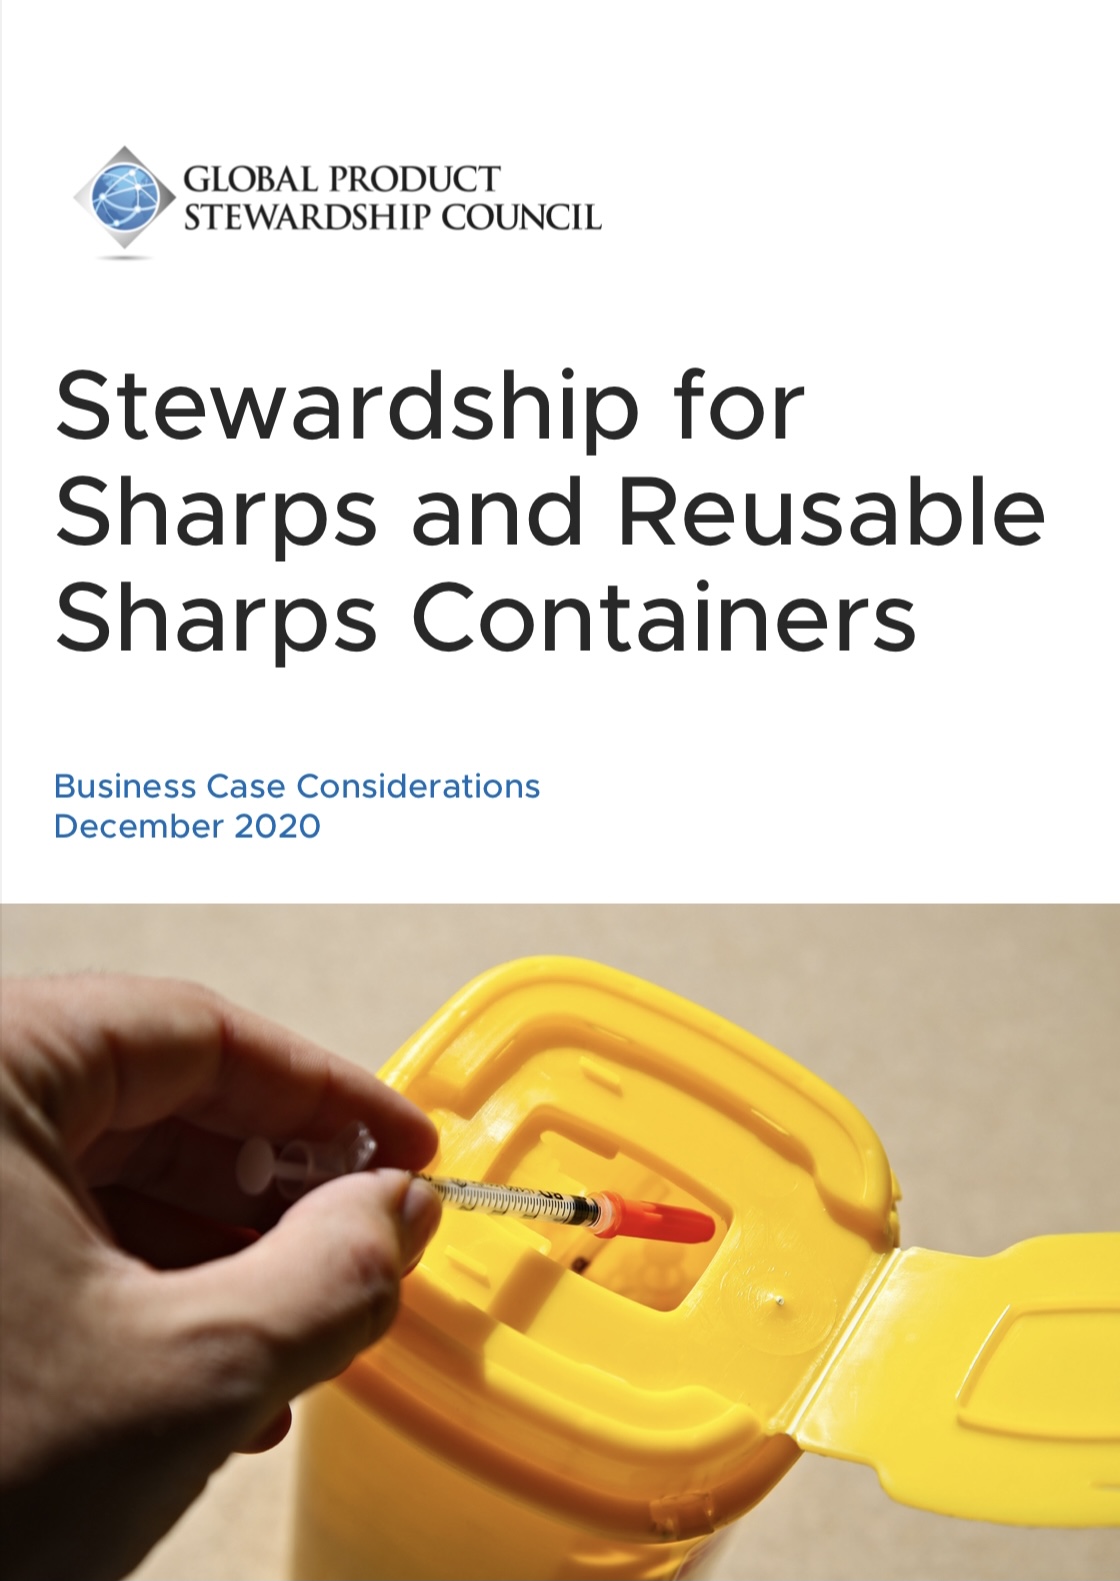 Business Case Considerations for Sharps Stewardship